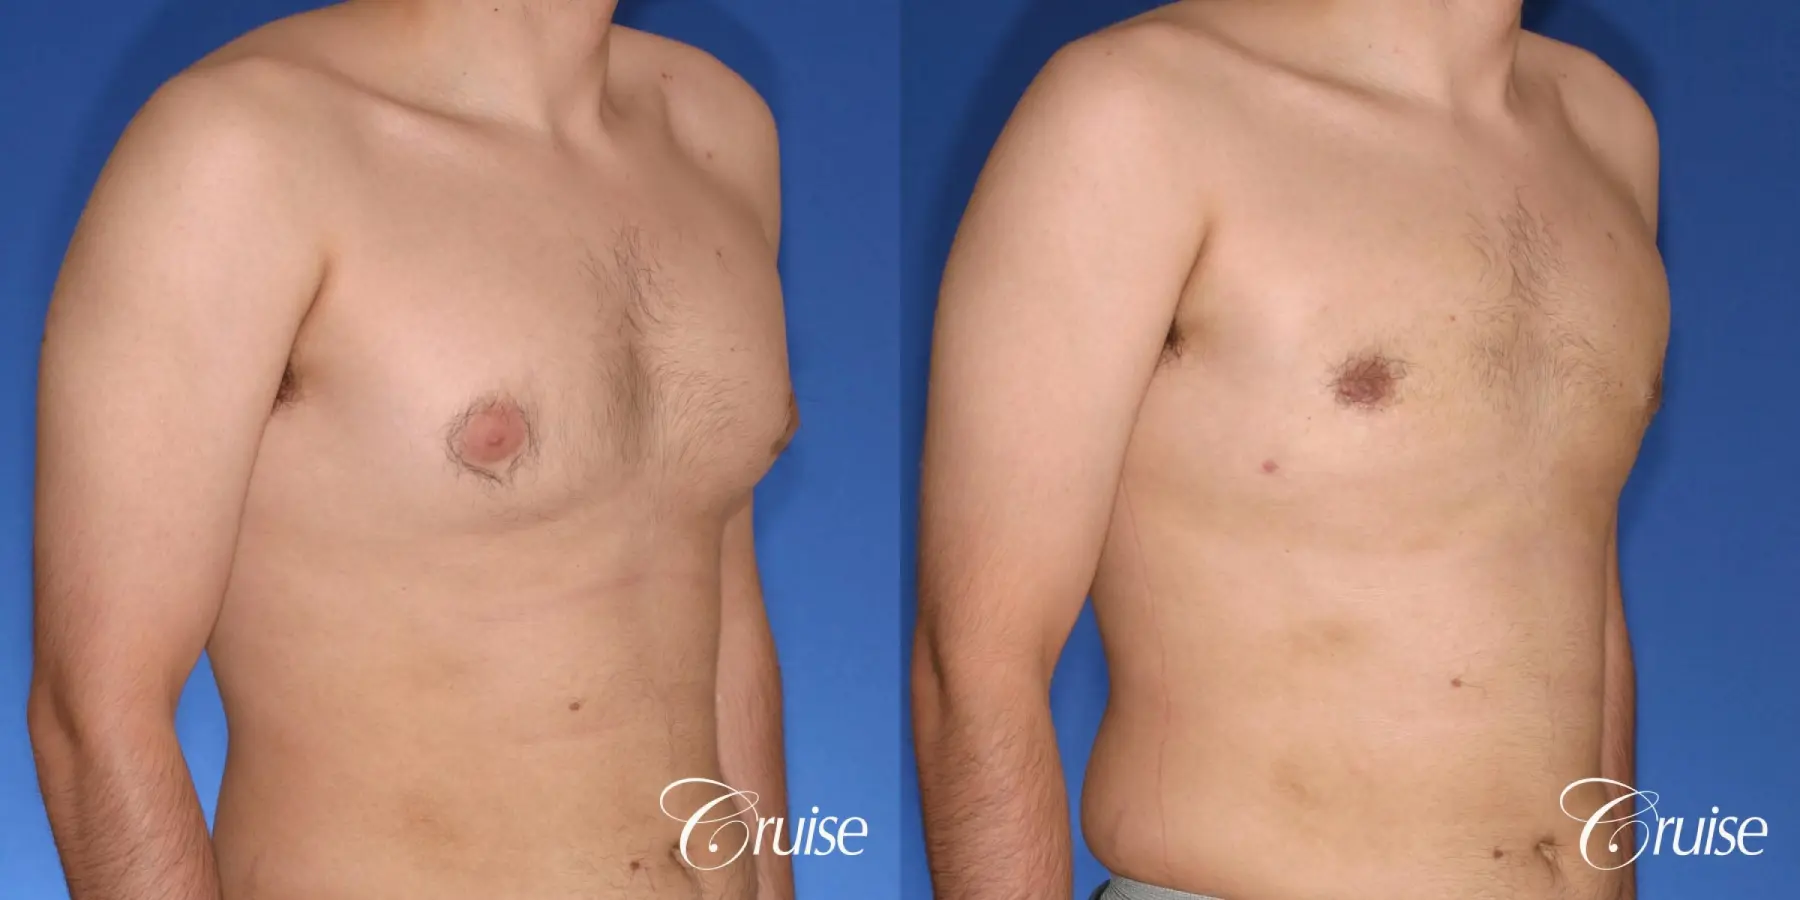 moderate gynecomastia puffy nipple - Before and After 4